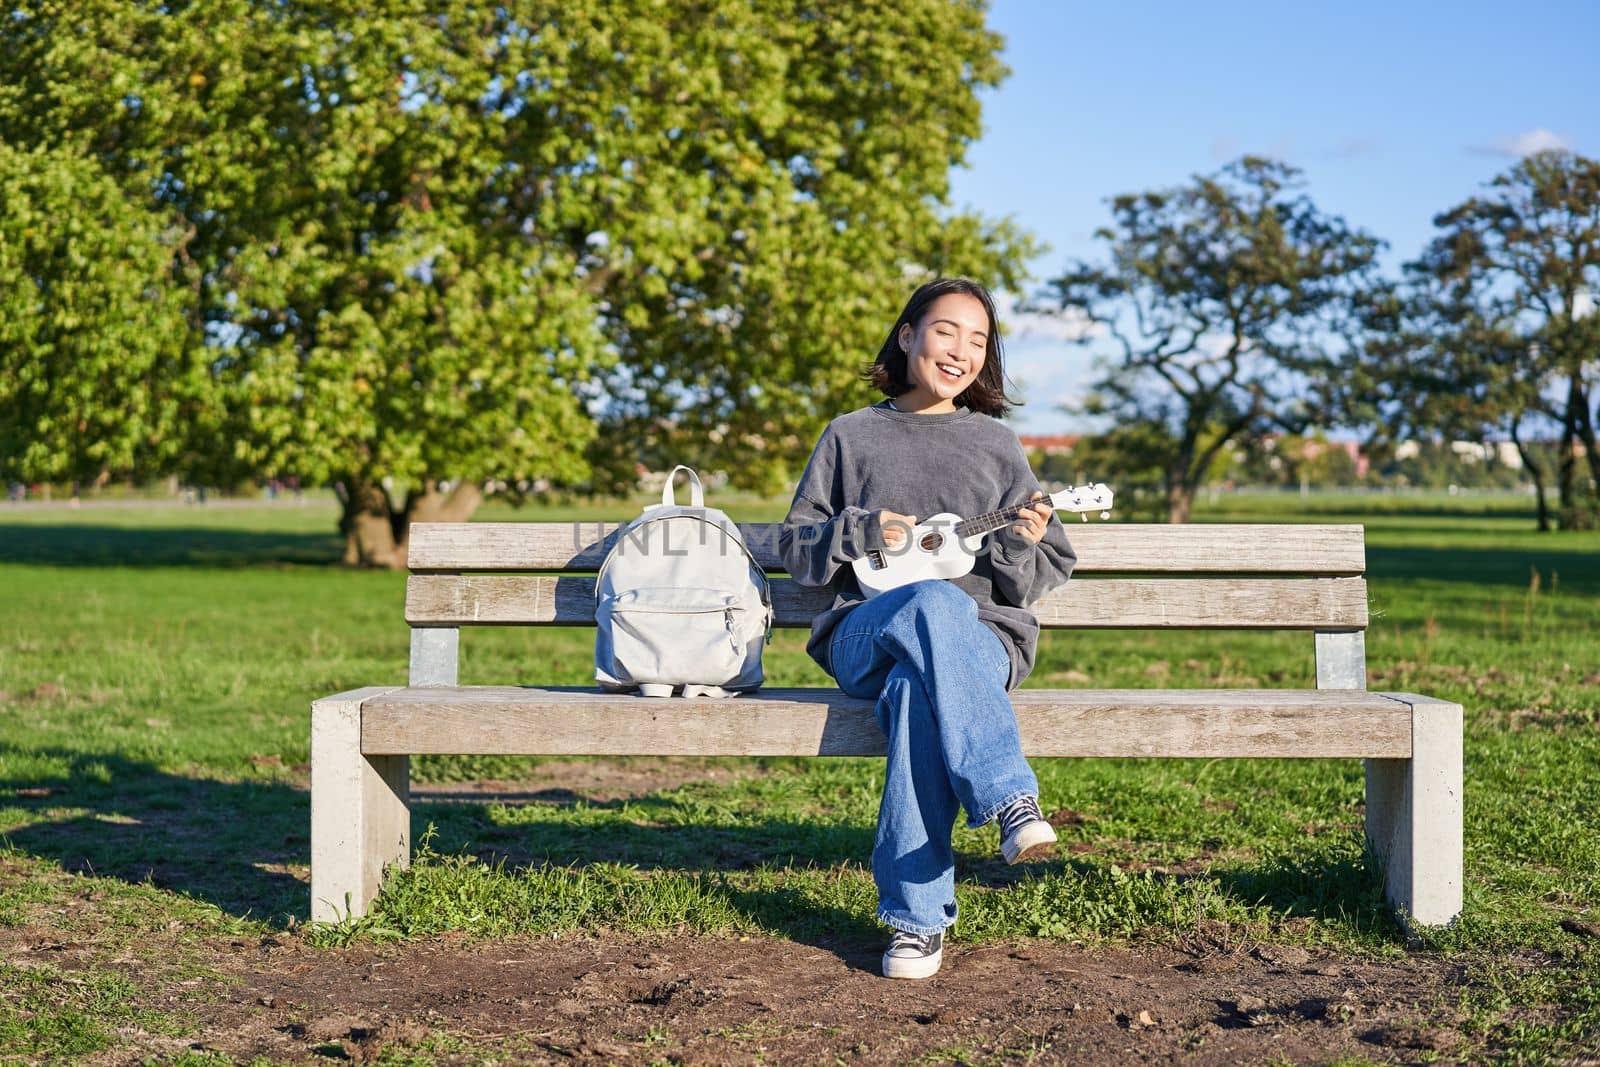 Carefree girl sits on bench in park with ukulele, plays and sings outdoors on sunny happy day.